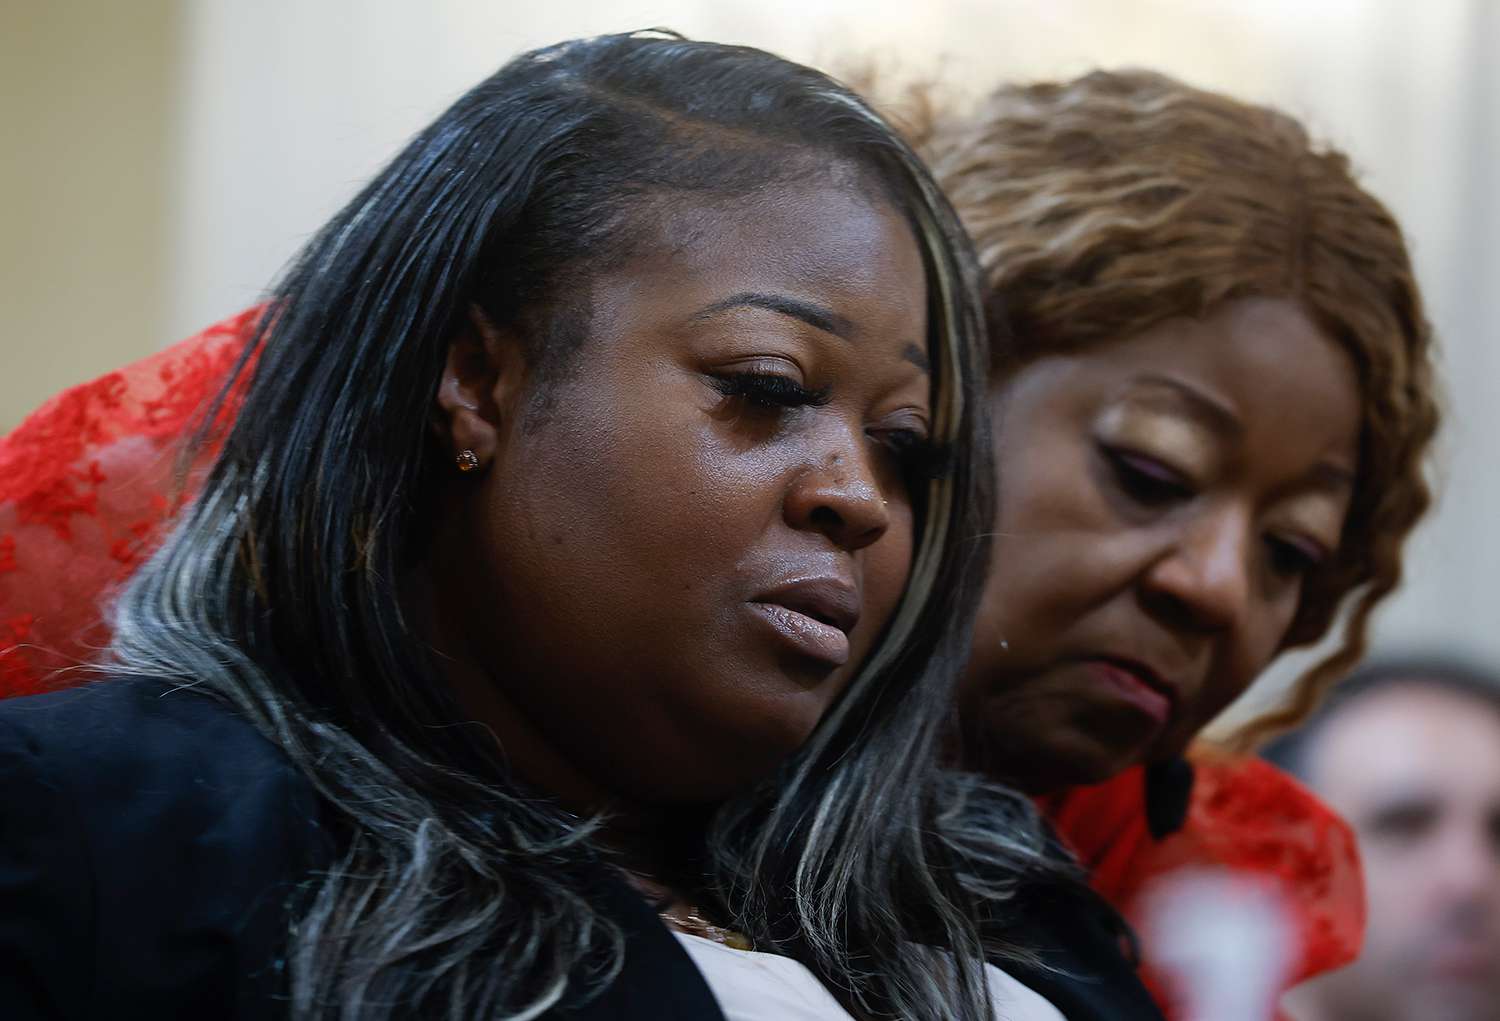 Wandrea ArShaye “Shaye” Moss (L), former Georgia election worker, is comforted by her mother Ruby Freeman (R) as Moss testifies during the fourth hearing on the January 6th investigation in the Cannon House Office Building on June 21, 2022 in Washington, DC. The bipartisan committee, which has been gathering evidence for almost a year related to the January 6 attack at the U.S. Capitol, is presenting its findings in a series of televised hearings. On January 6, 2021, supporters of former President Donald Trump attacked the U.S. Capitol Building during an attempt to disrupt a congressional vote to confirm the electoral college win for President Joe Biden.